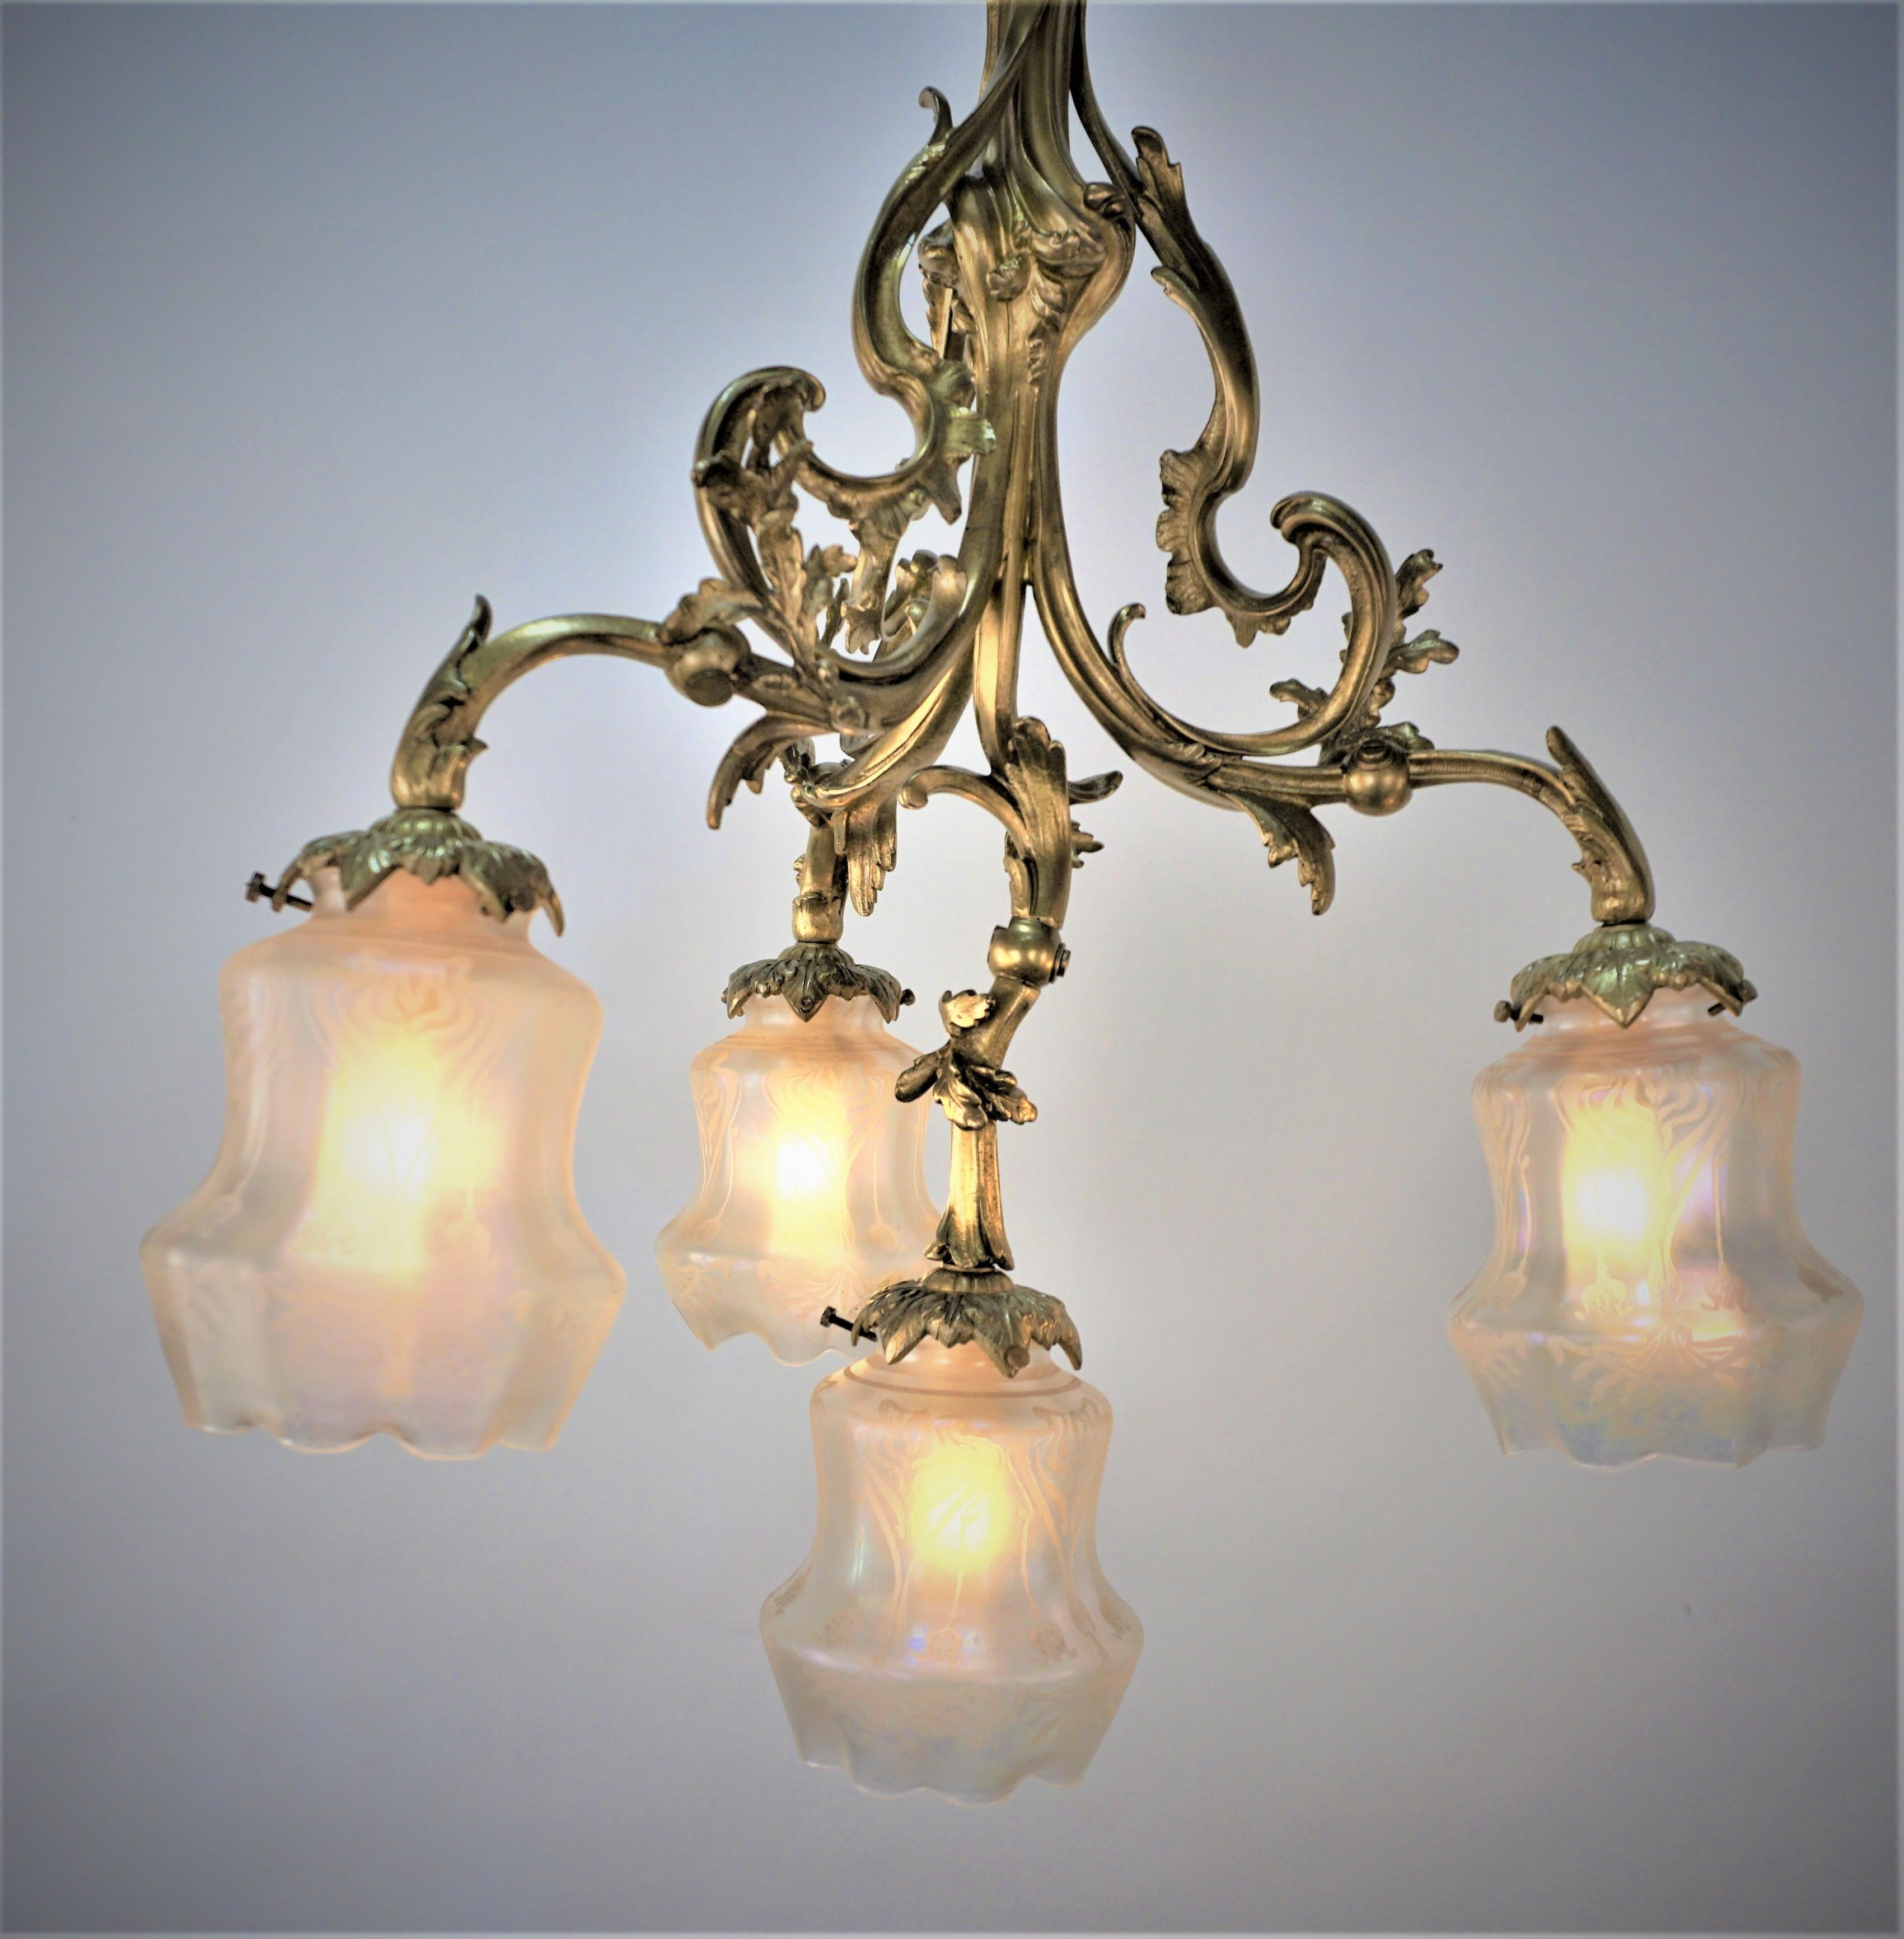 French Art Nouveau bronze chandelier with four iridescent etched glass shades.